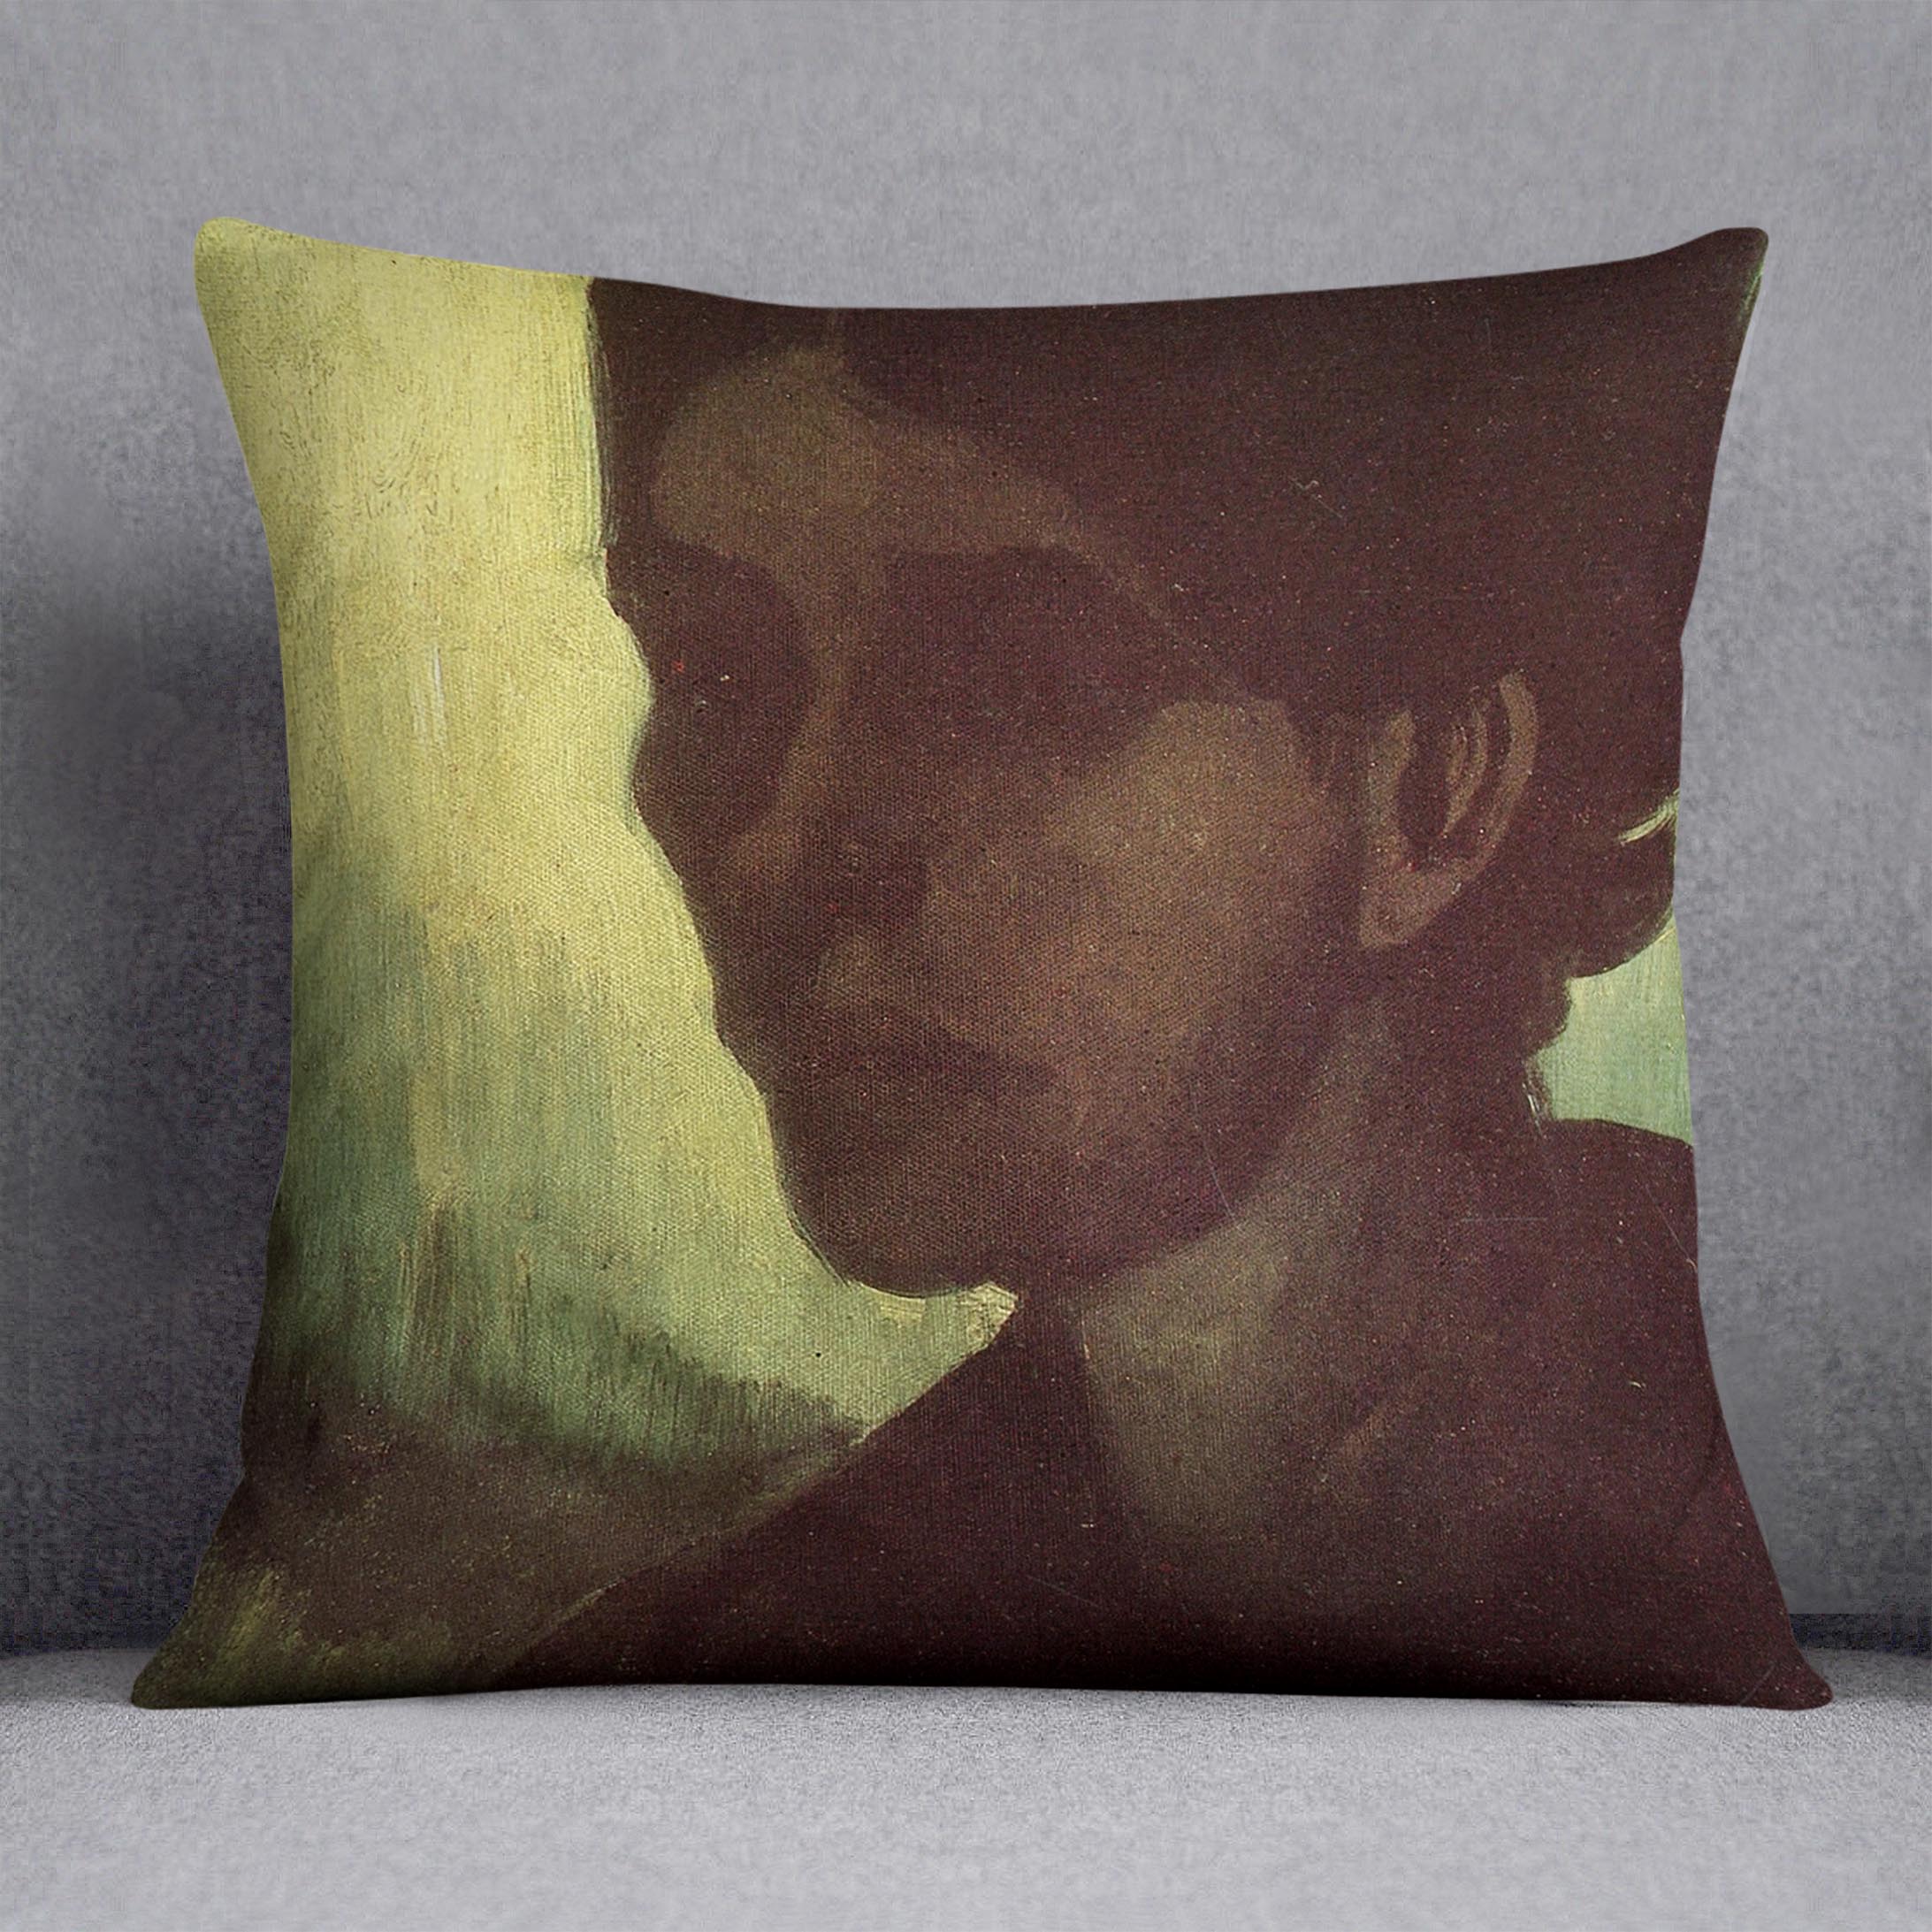 Head of a Young Peasant Woman with Dark Cap by Van Gogh Cushion